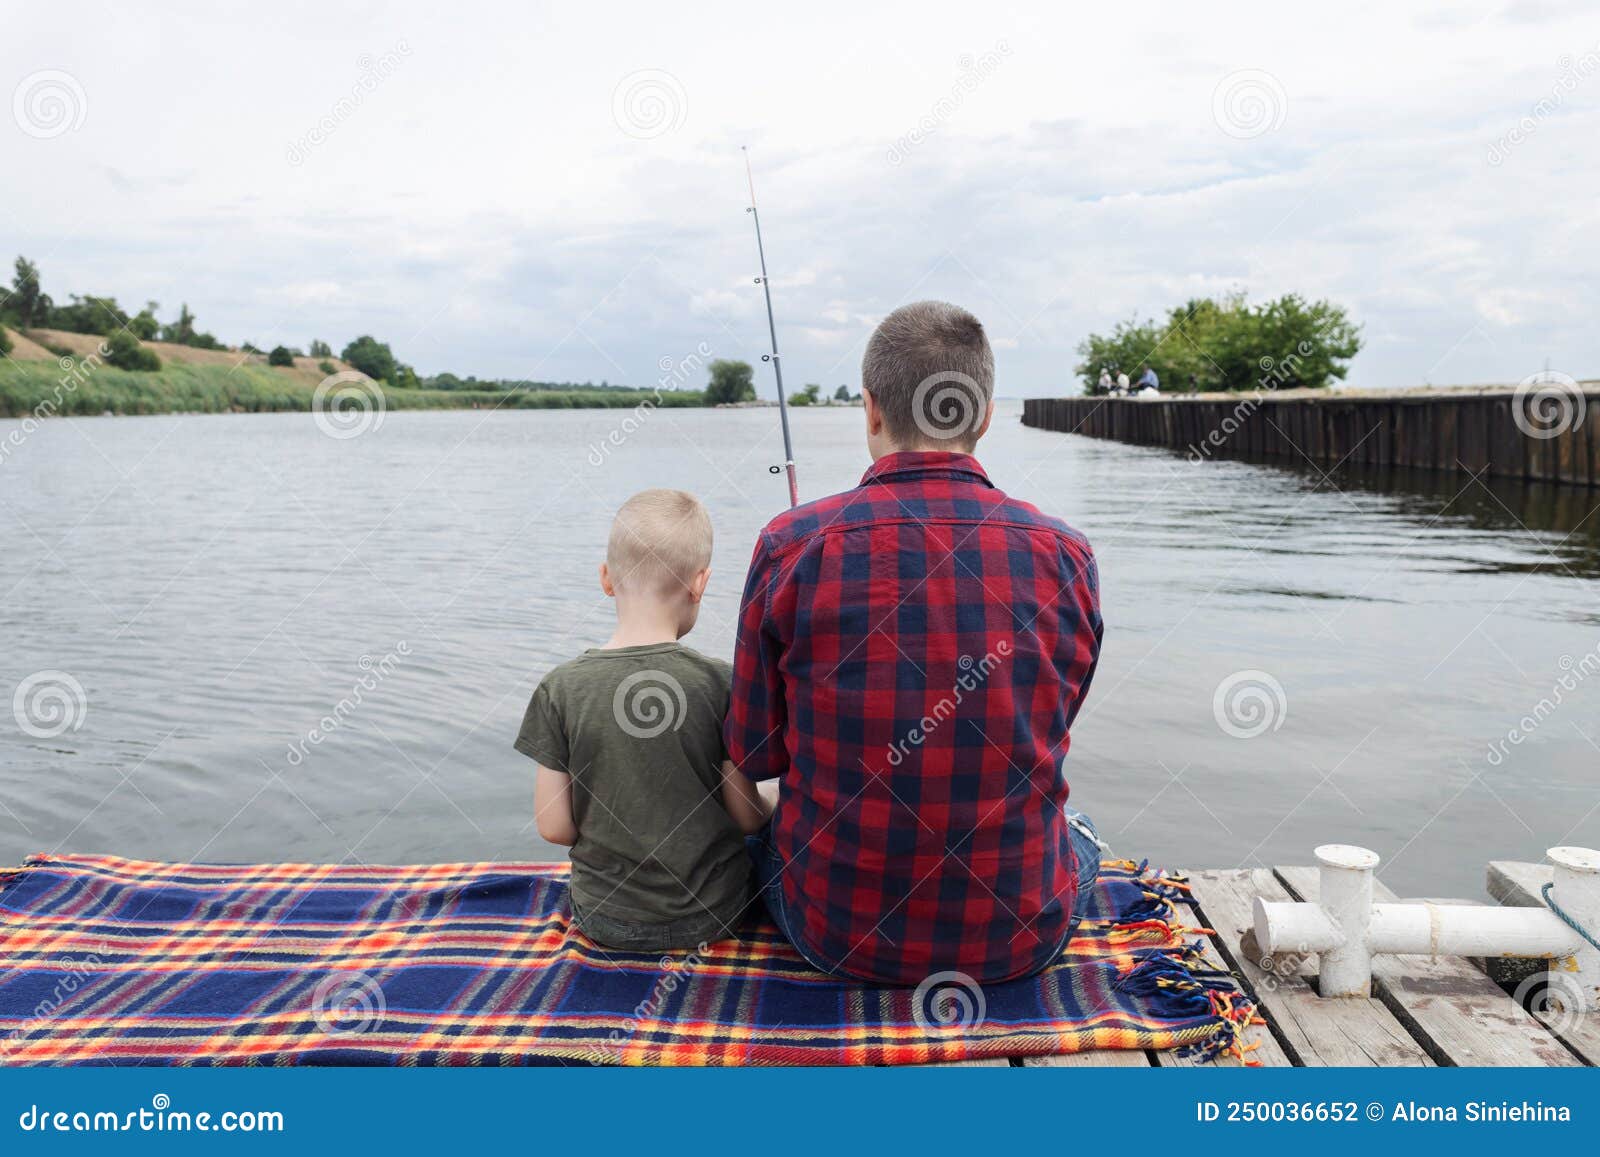 Father and Son Fishing. Dad Shows His Son How To Hold the Spinning and Spin  the Reel. Fishing Training on a Pond or River. Caring Stock Photo - Image  of hobbies, caucasian